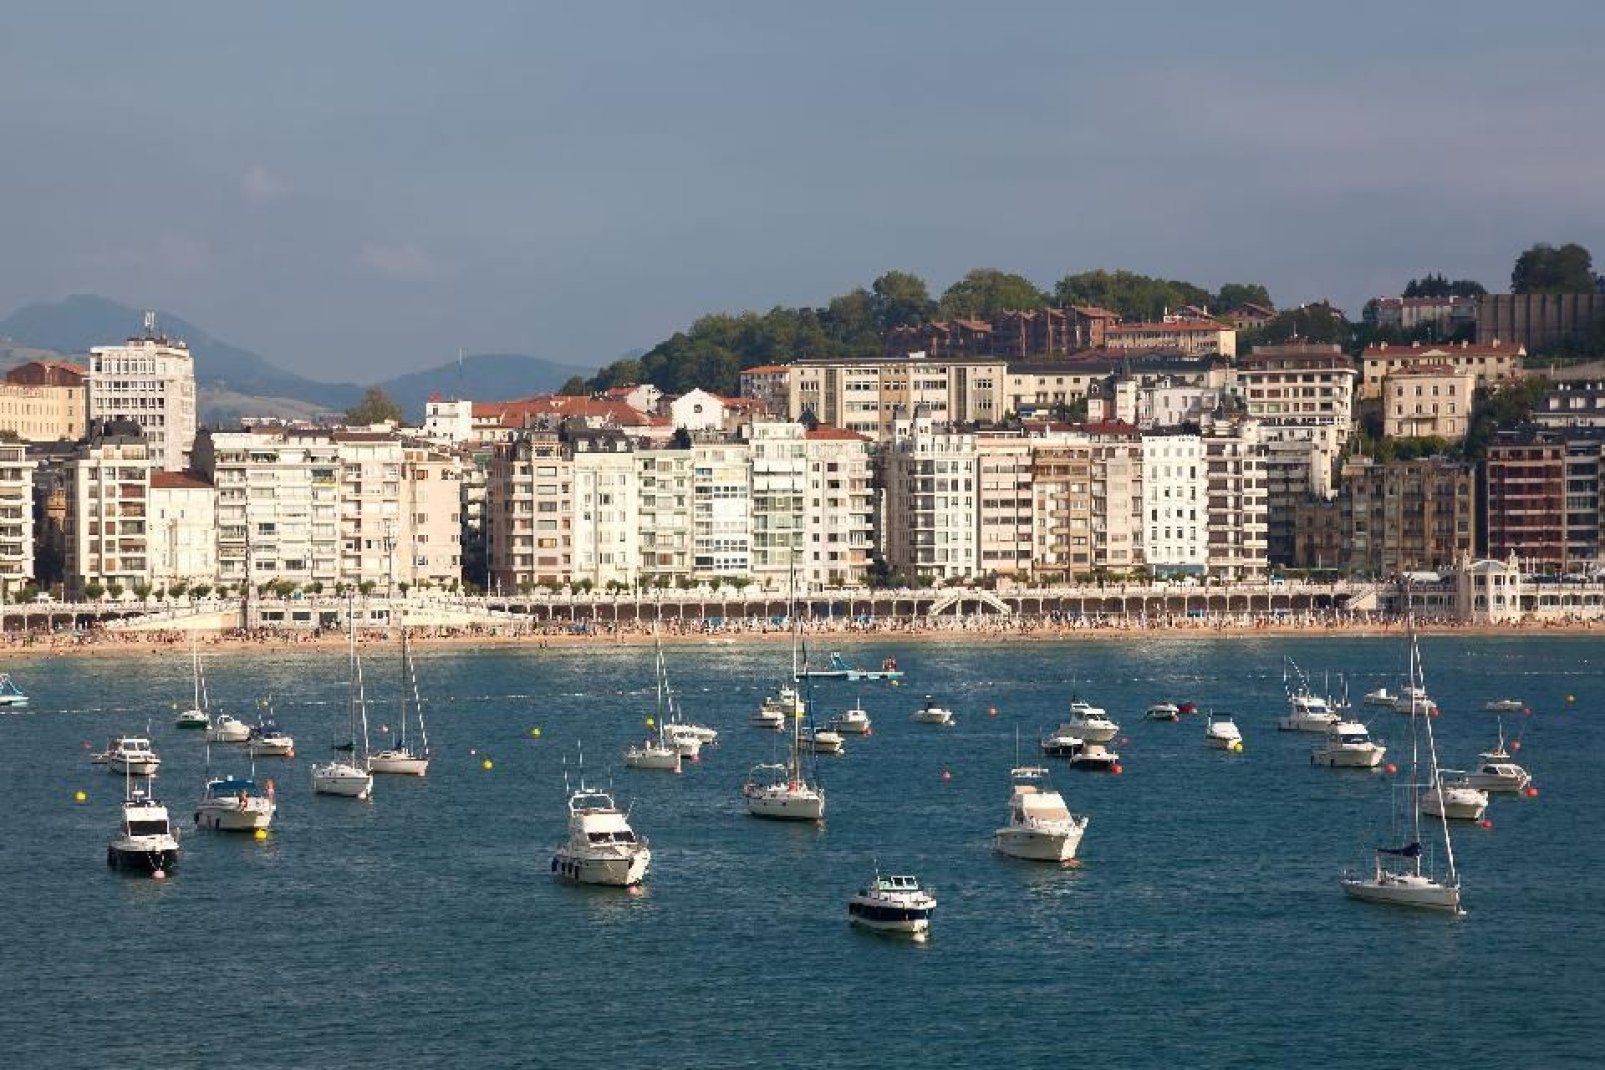 Despite the city's small size, international events such as the San Sebastián International Film Festival have given it an international dimension.